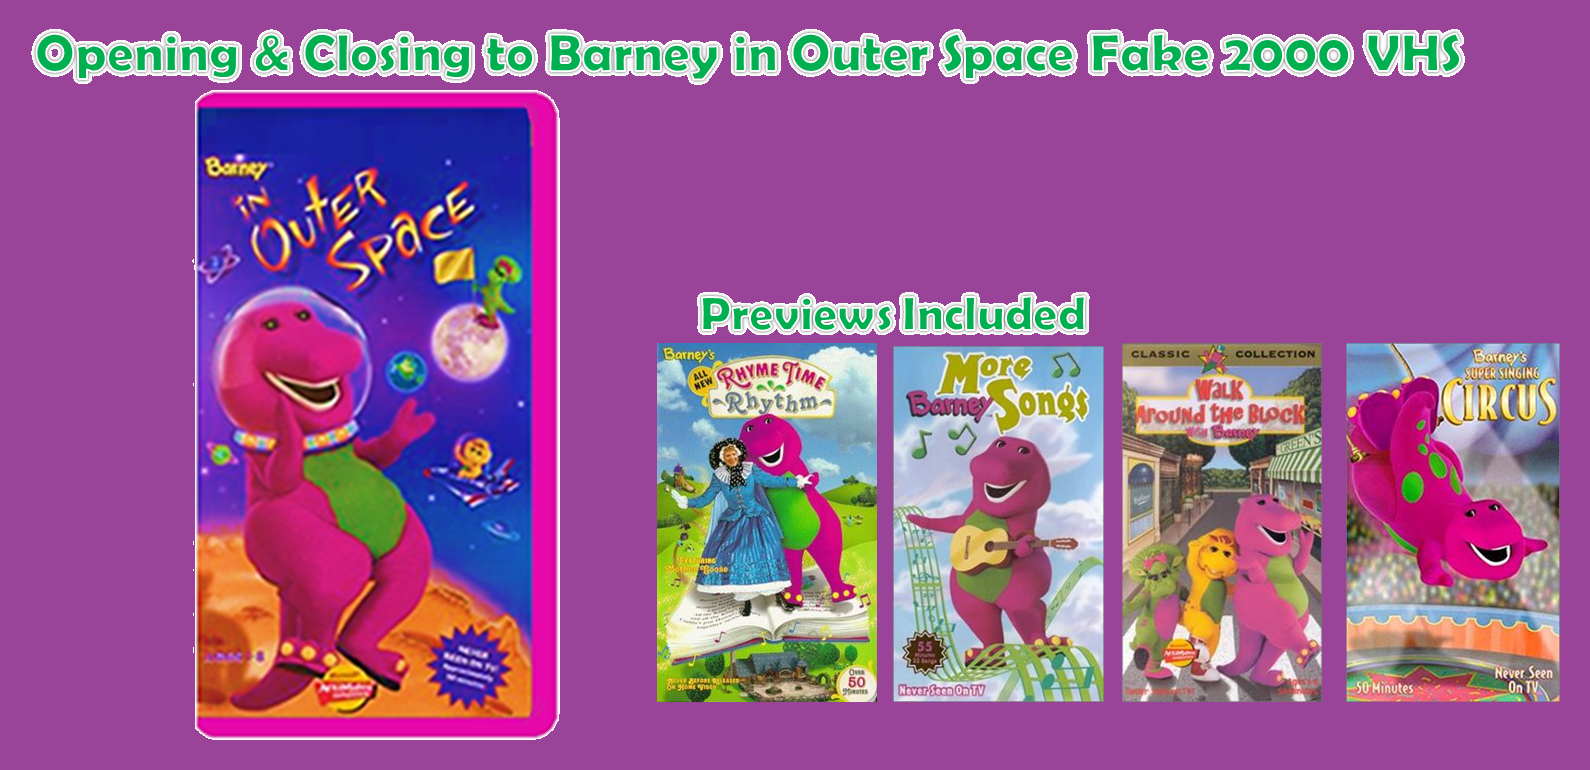 Opening and Closing to Barney in Outer Space 2000 VHS ...